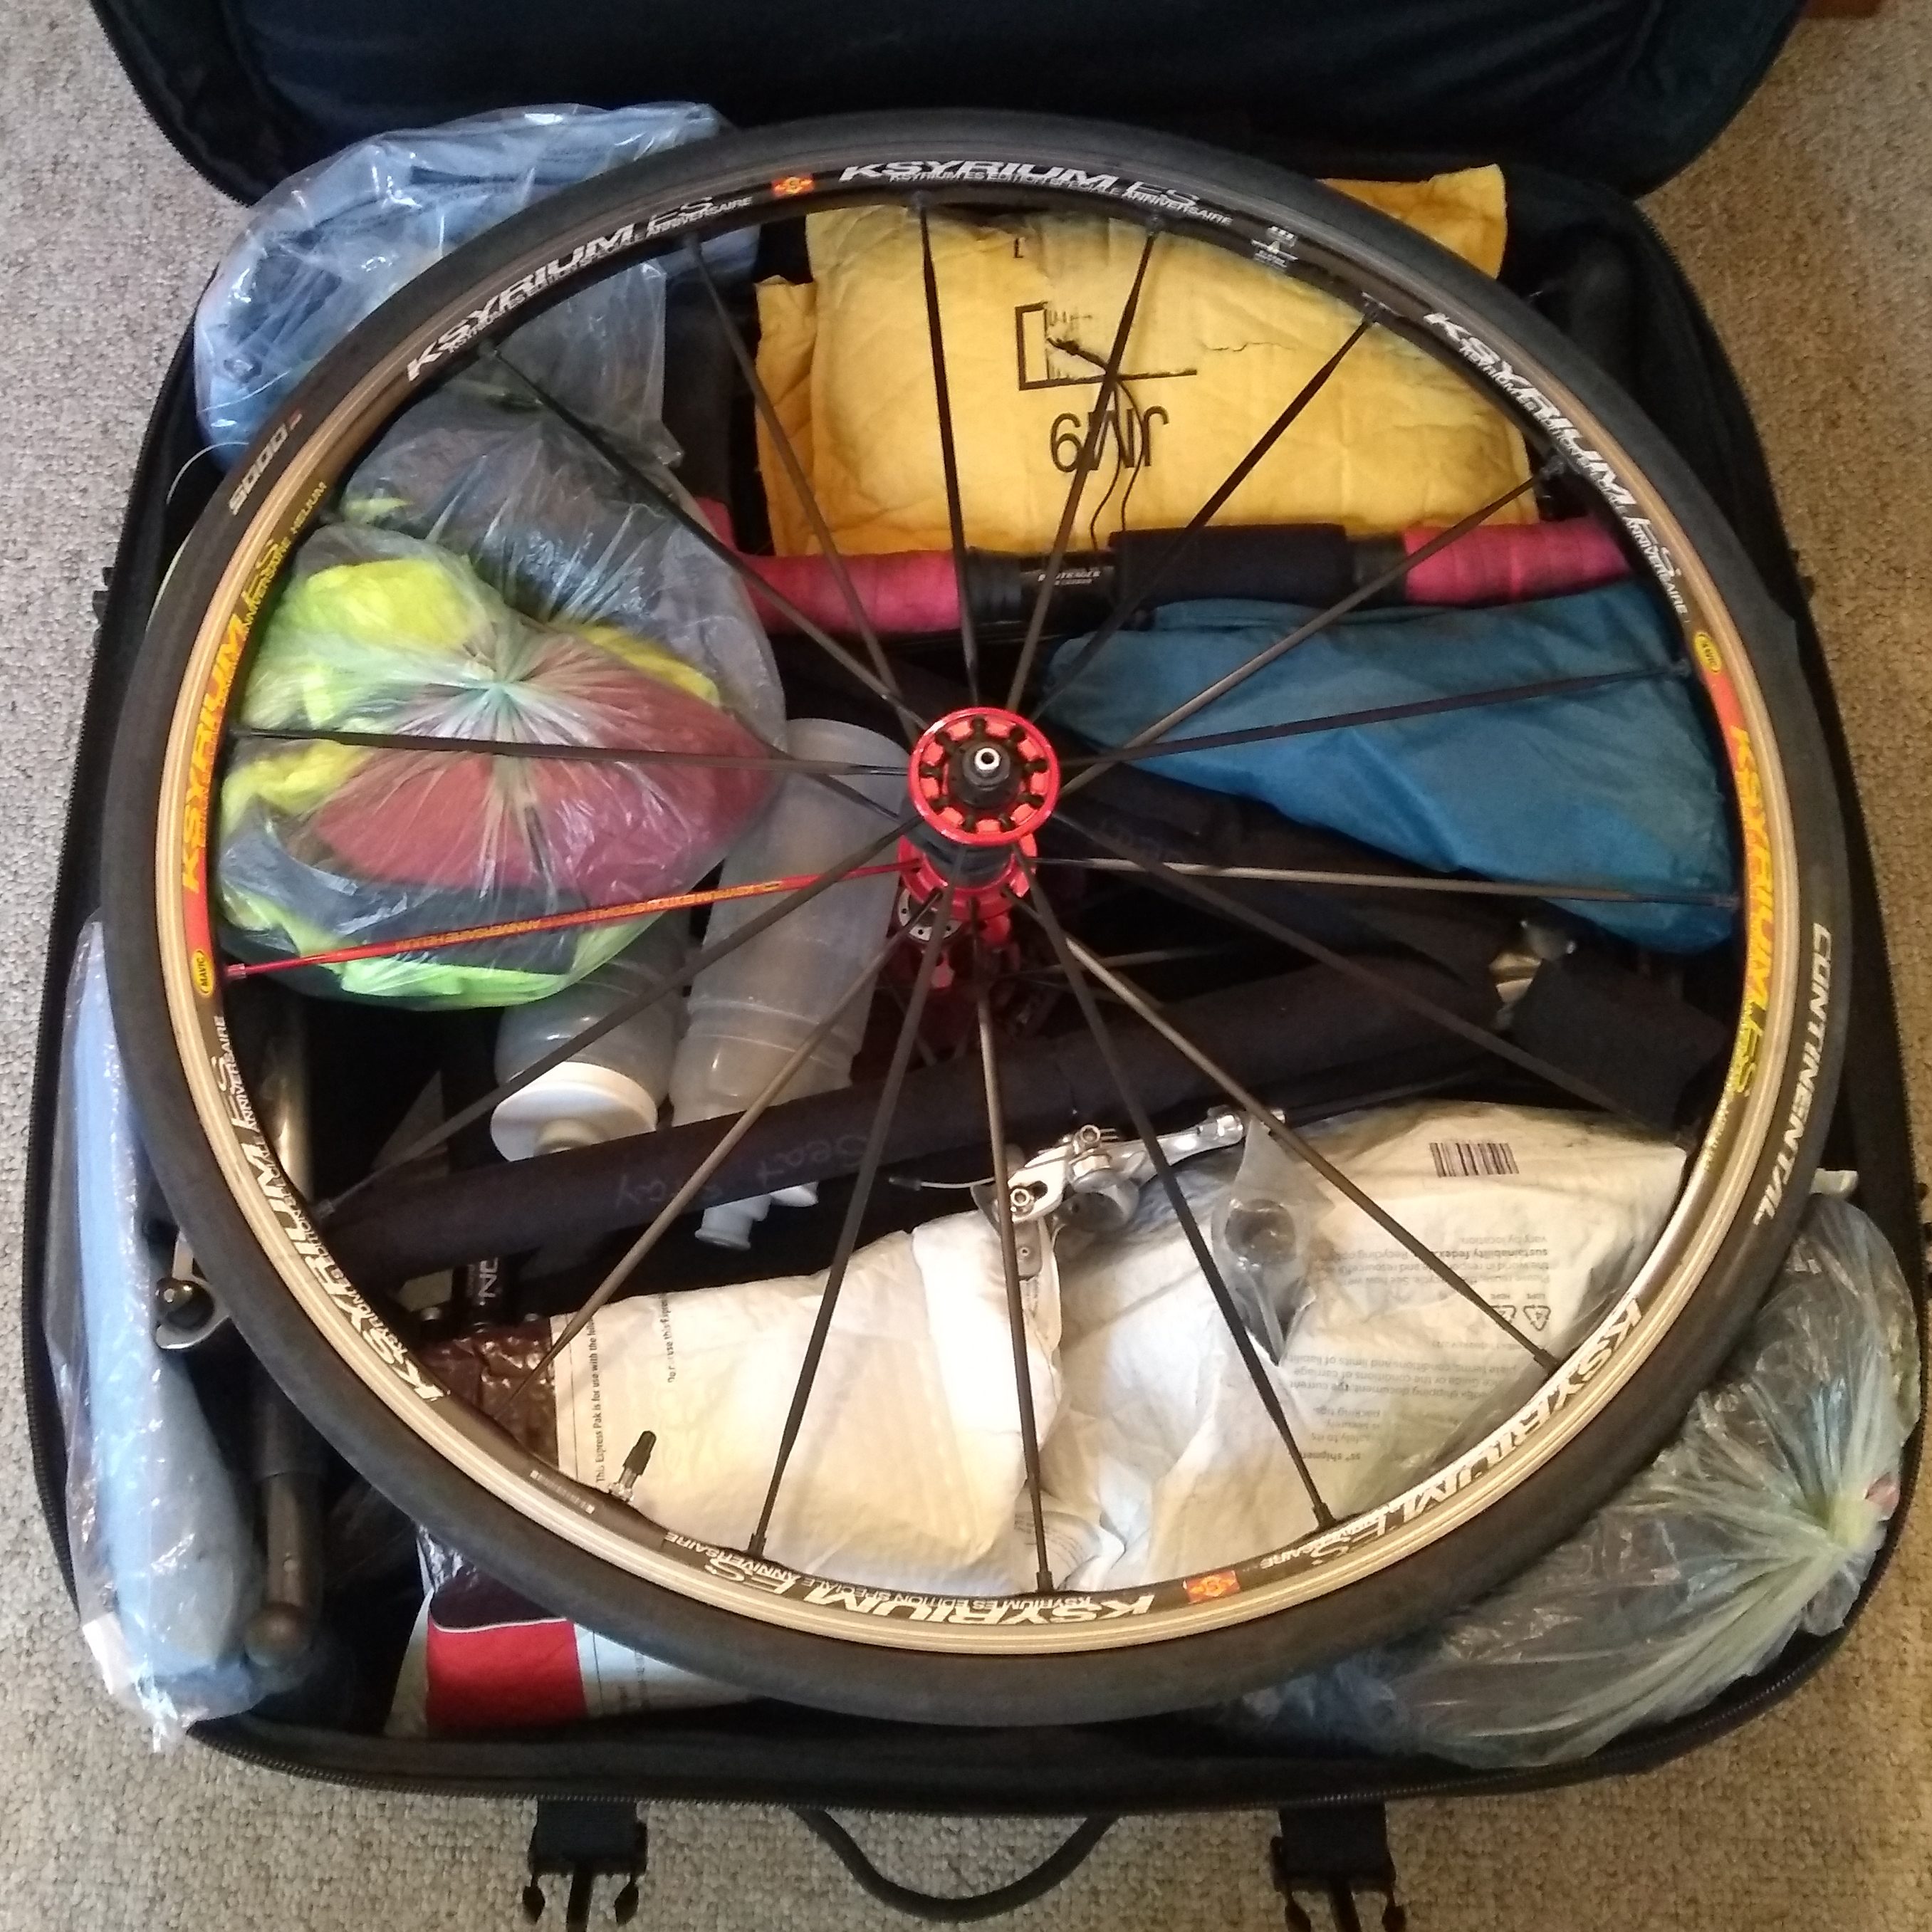 Suitcase with my bike packed into it